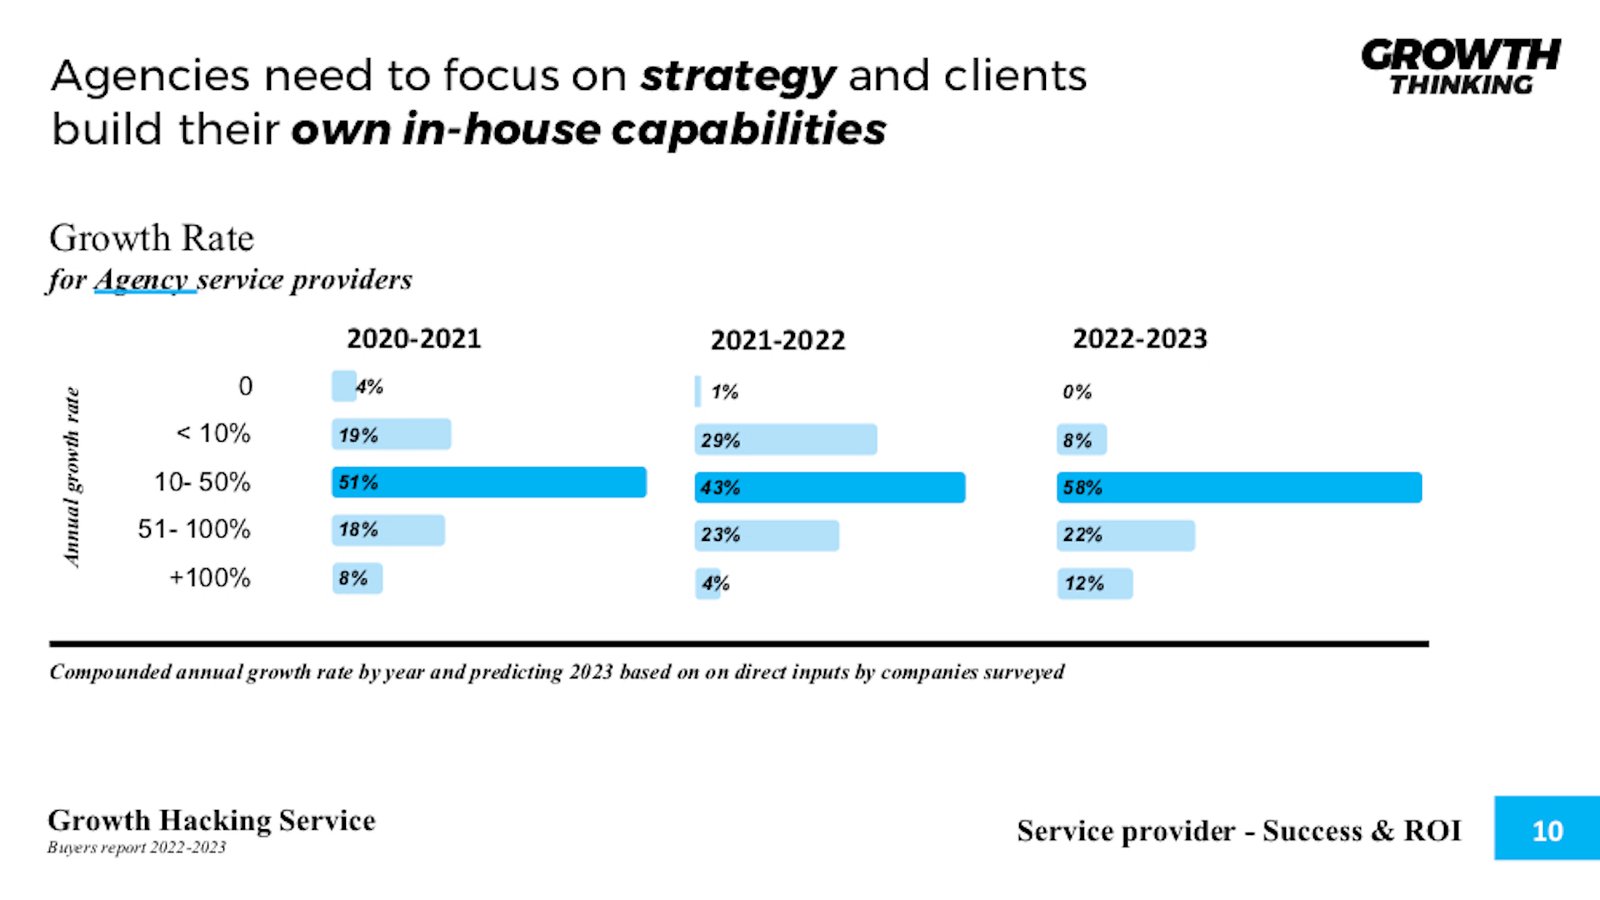 Growth Rate for Agencies service providers